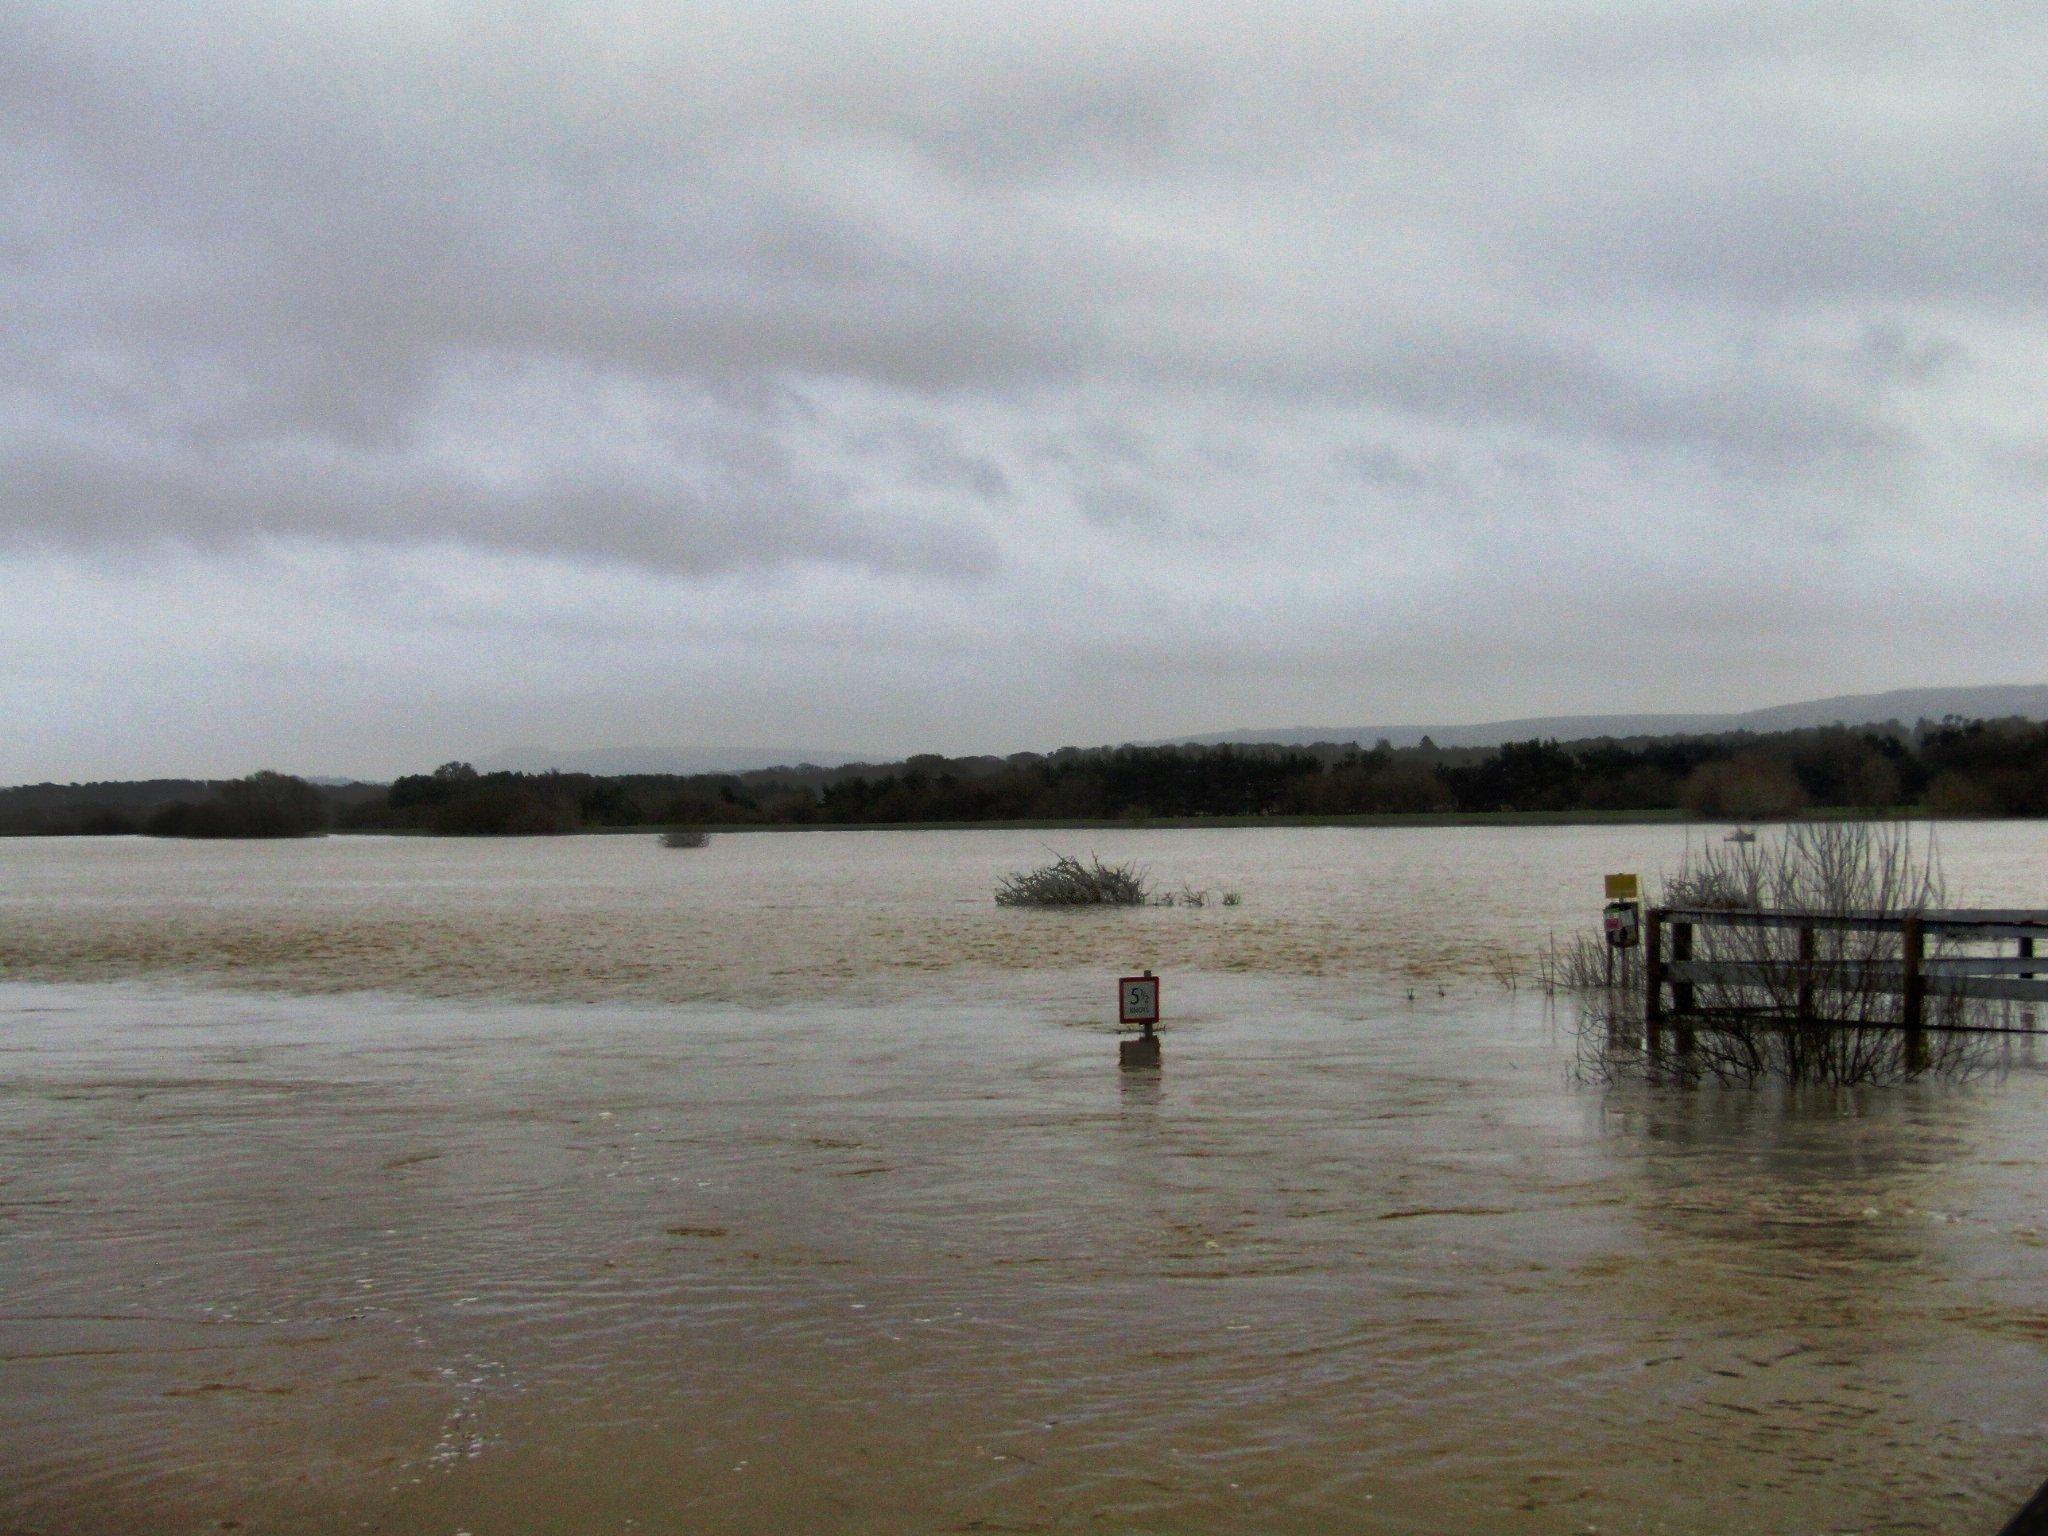 Flooding in Pulborough. Photo by Cynthia Caddell